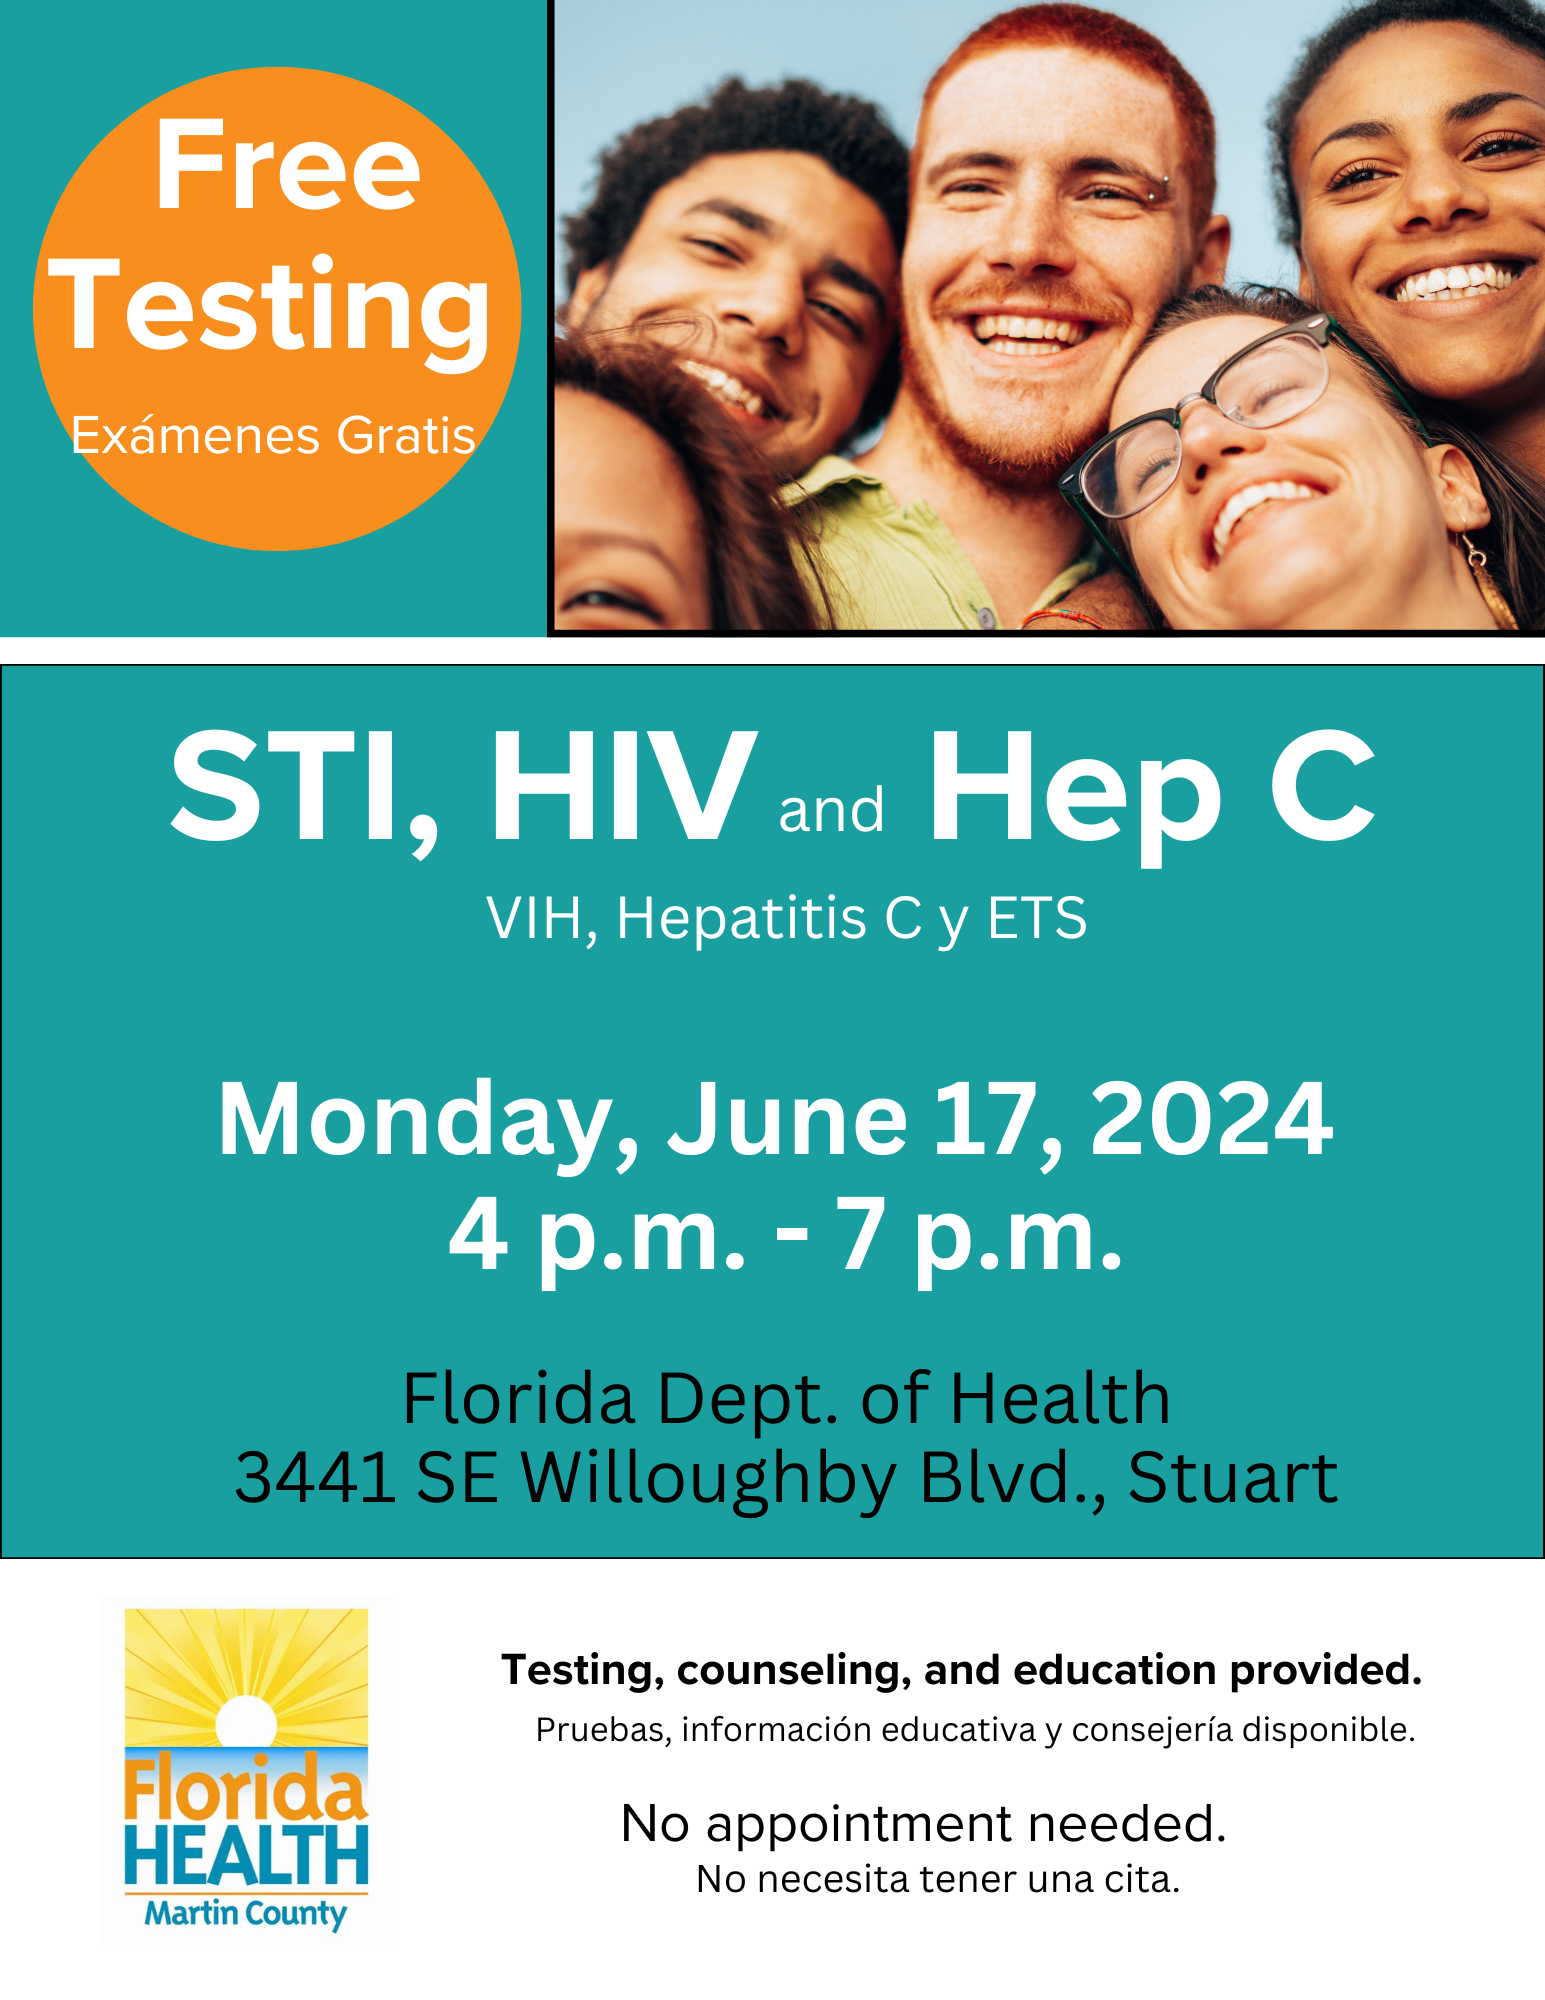 Free testing - STI, HIV and Hep C. Monday June 17th 2024 4:00 PM to 7:00 PM at the Florida Department of Health 3441 SE Willoughby Blvd. Stuart, Testing, counseling,and education provided. No appointment needed.